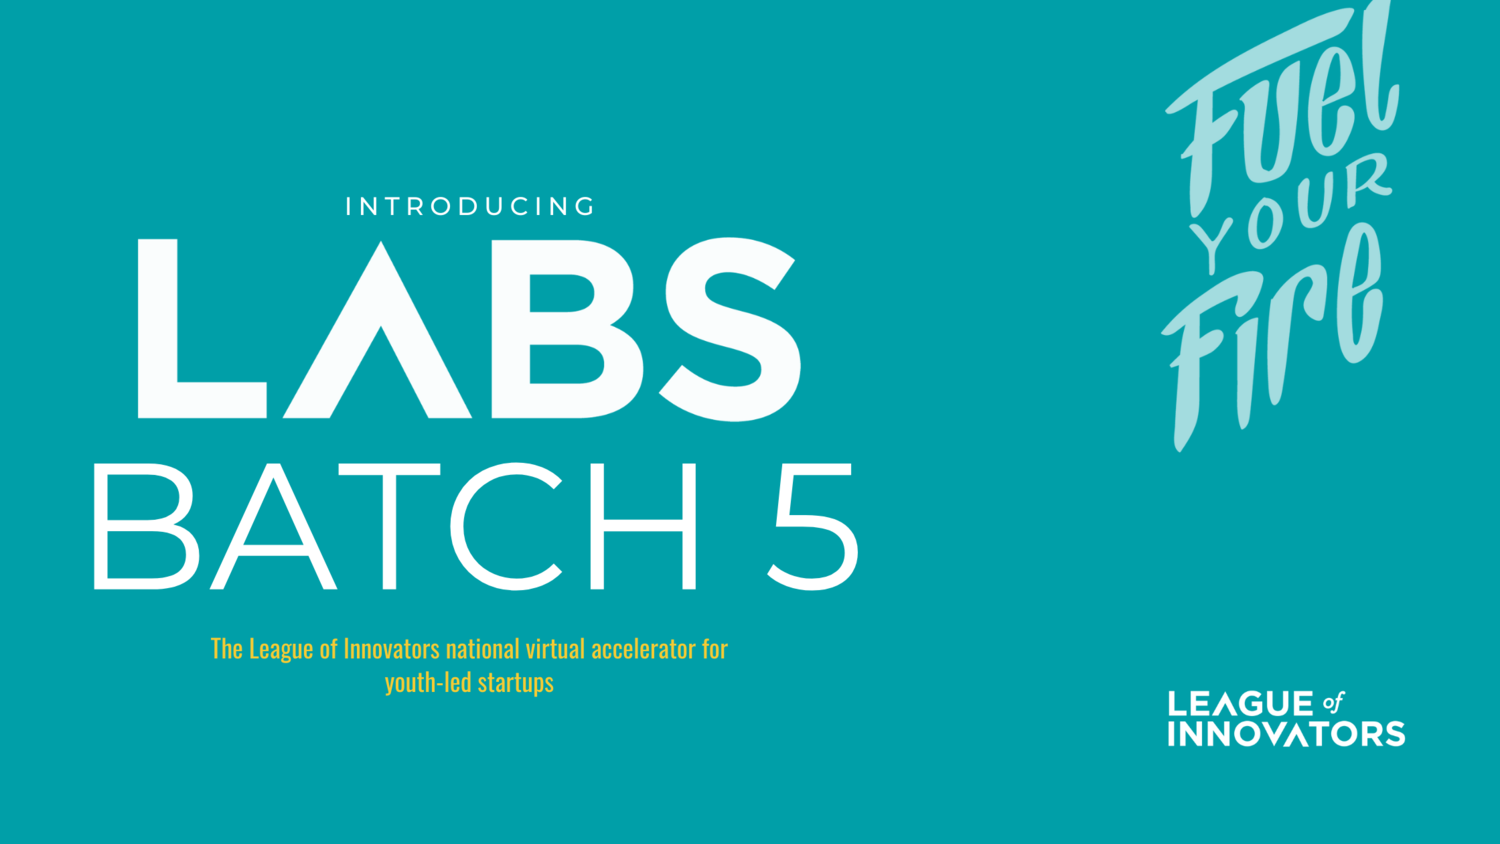 Introducing Batch 5 of the League of Innovators Labs Accelerator ...